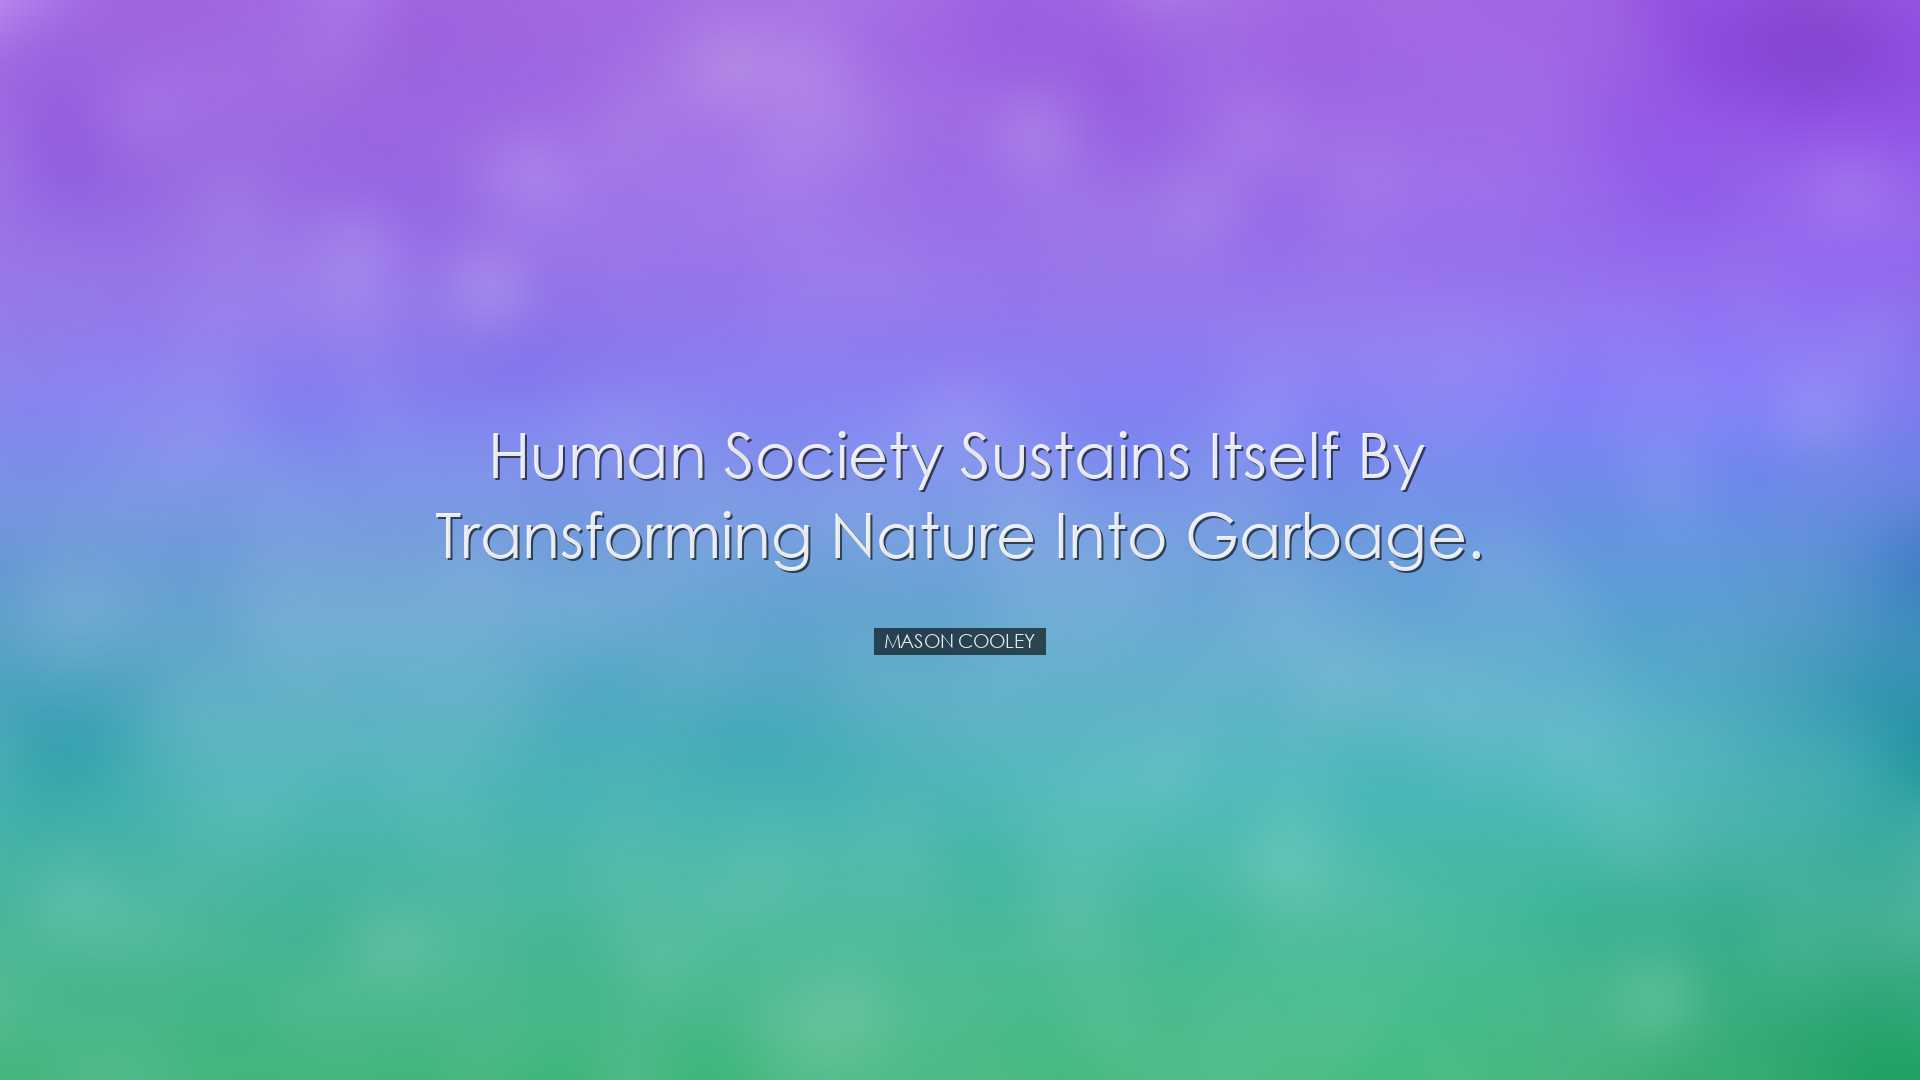 Human society sustains itself by transforming nature into garbage.